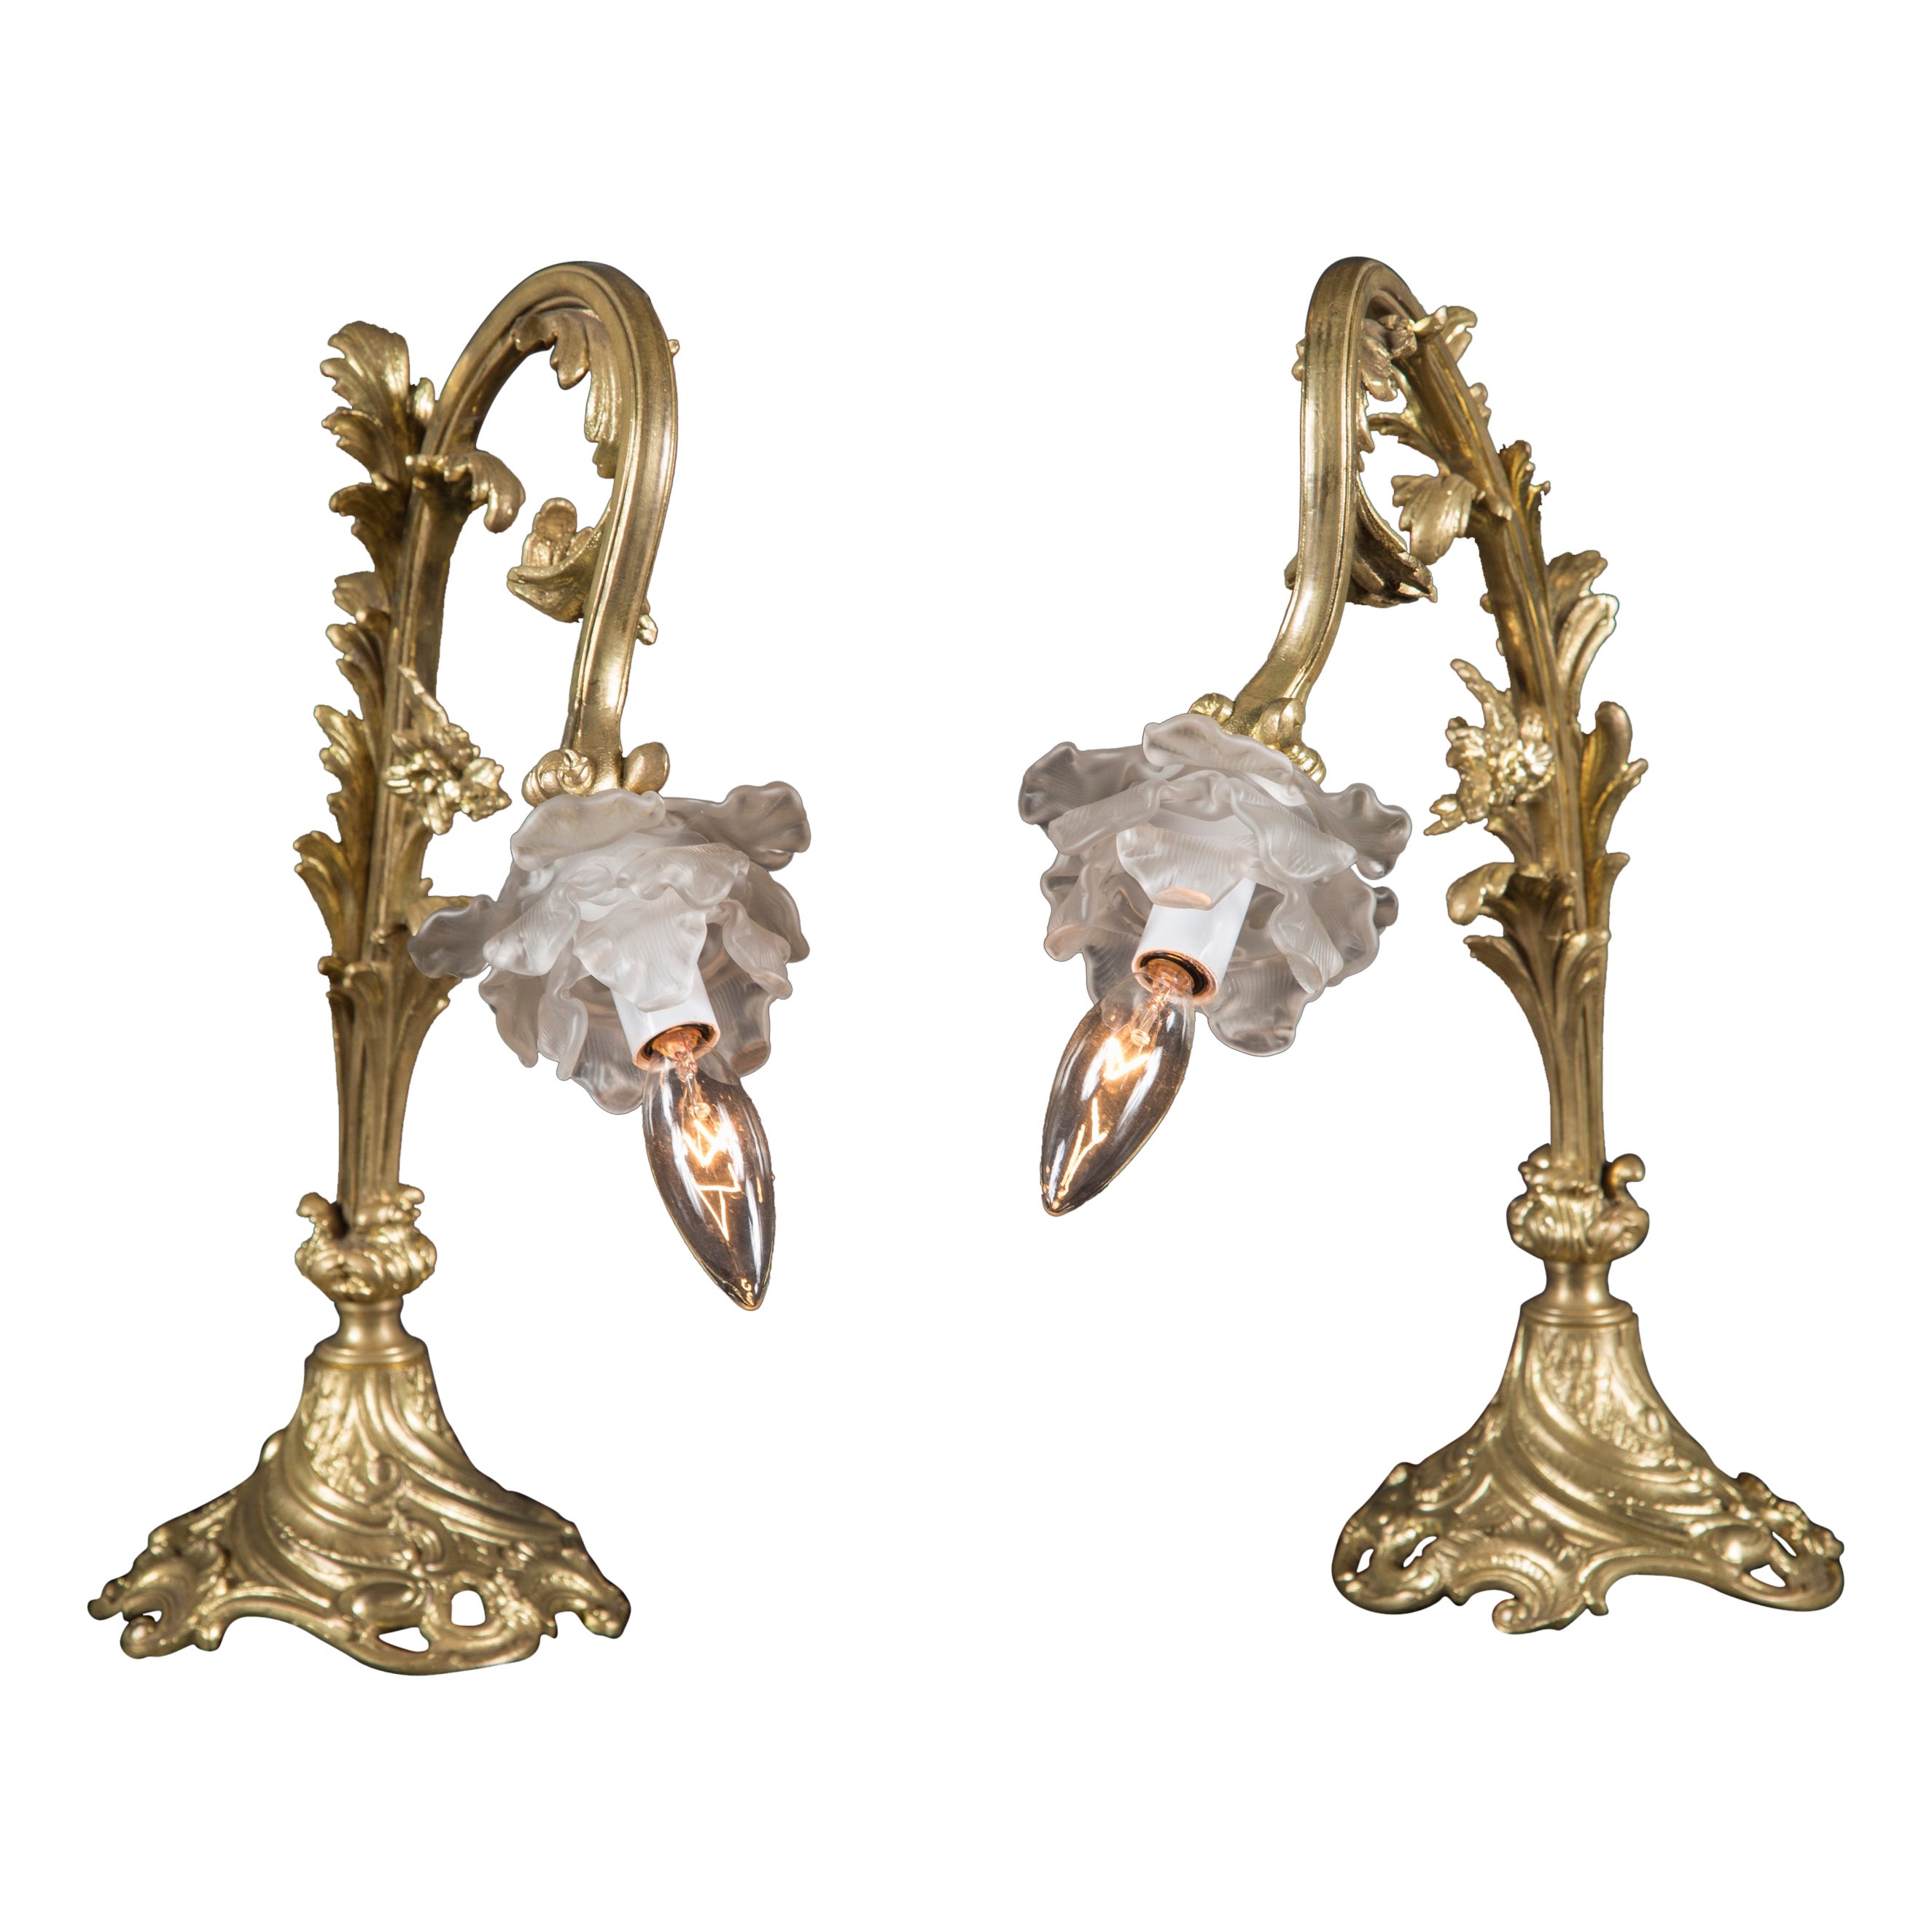 Pair of Art Nouveau Lamps with Delicate Satin Glass Roses, French, 19th Century For Sale